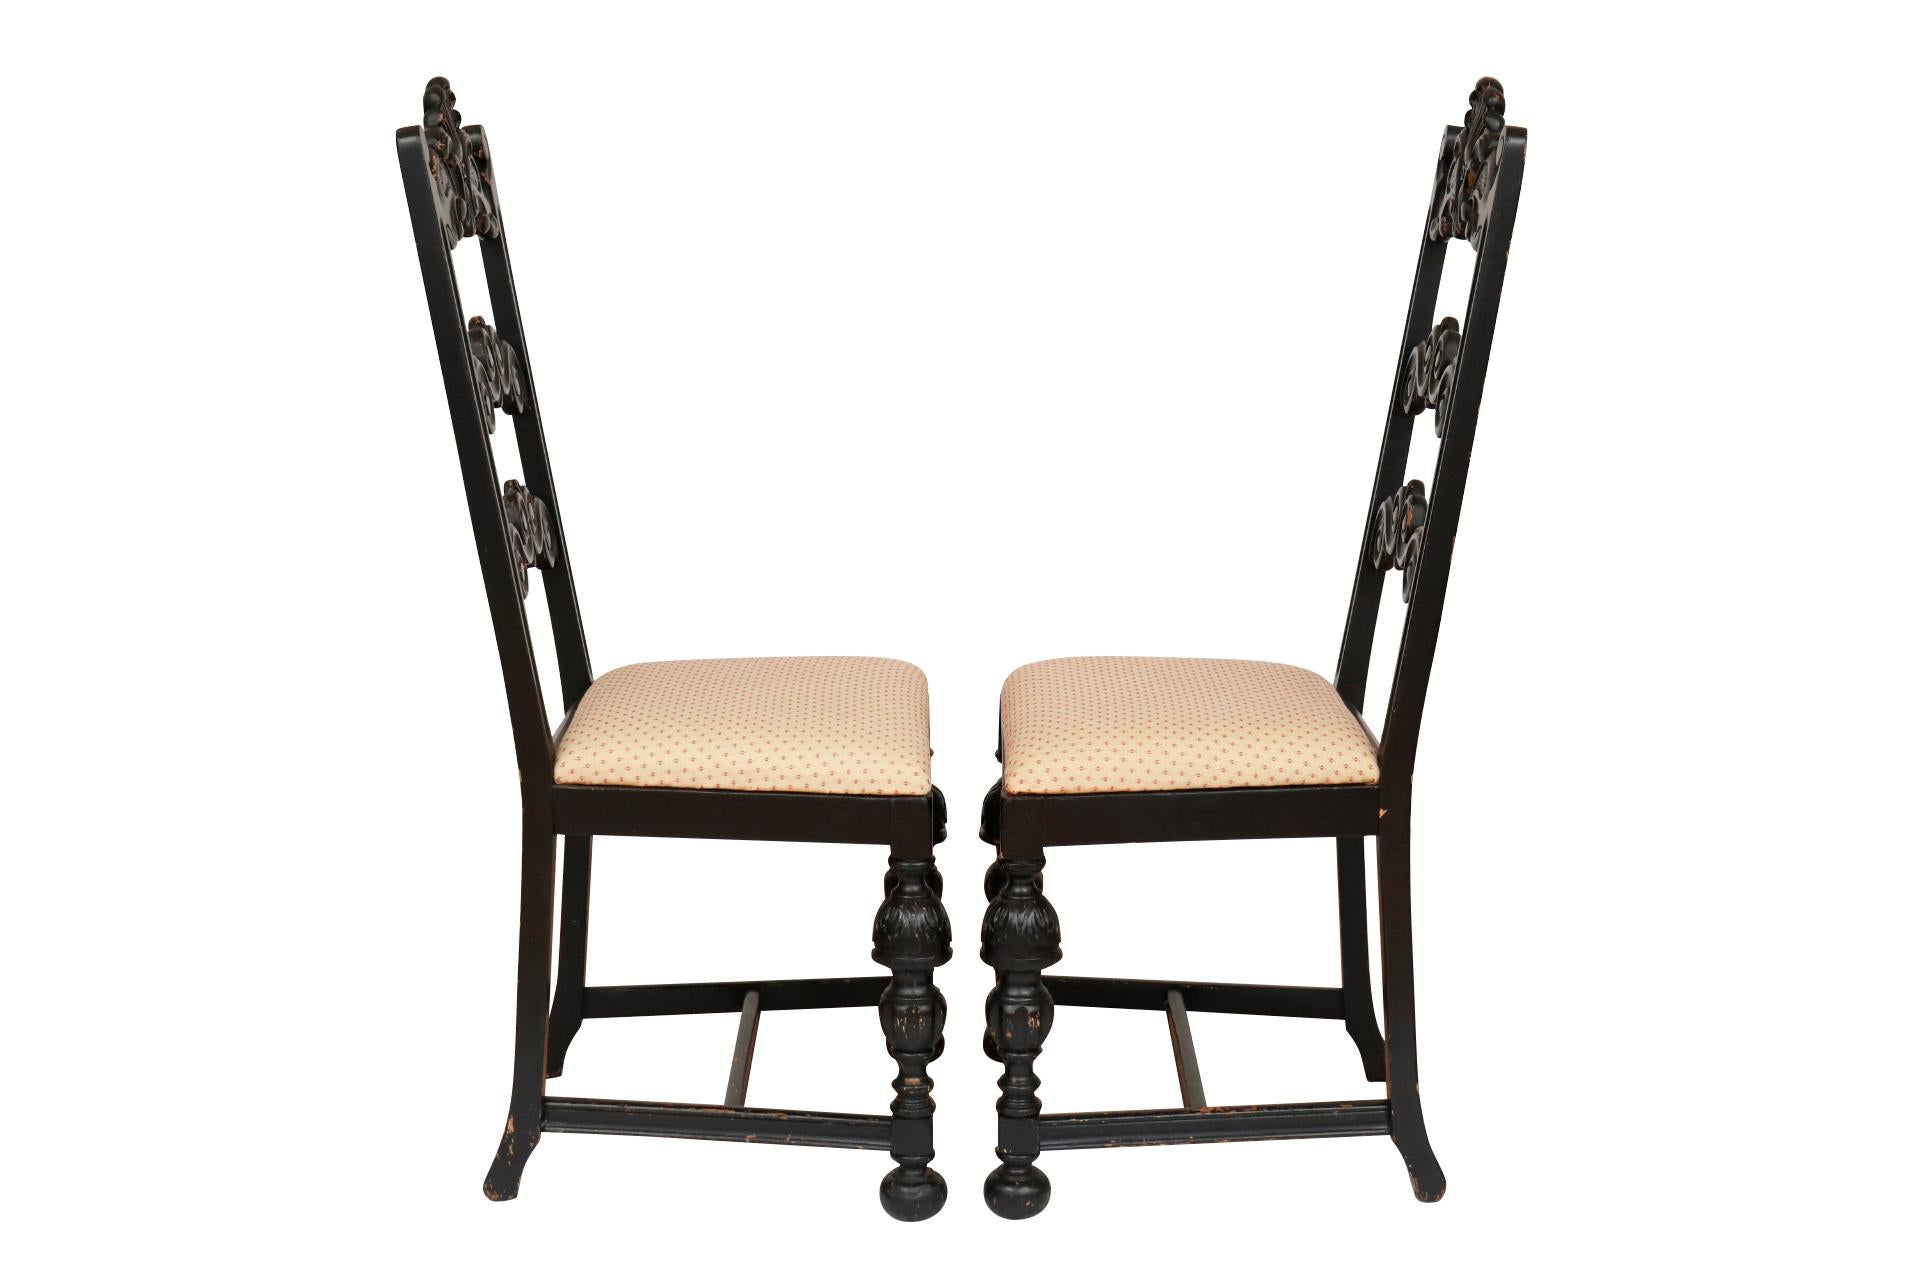 A pair of William & Mary ladderback side chairs. Tall chair backs are constructed with three cross rails elaborately carved with serpentine scrolls and a central plume of feathers. Square seats are upholstered in a yellow fabric stitched with a